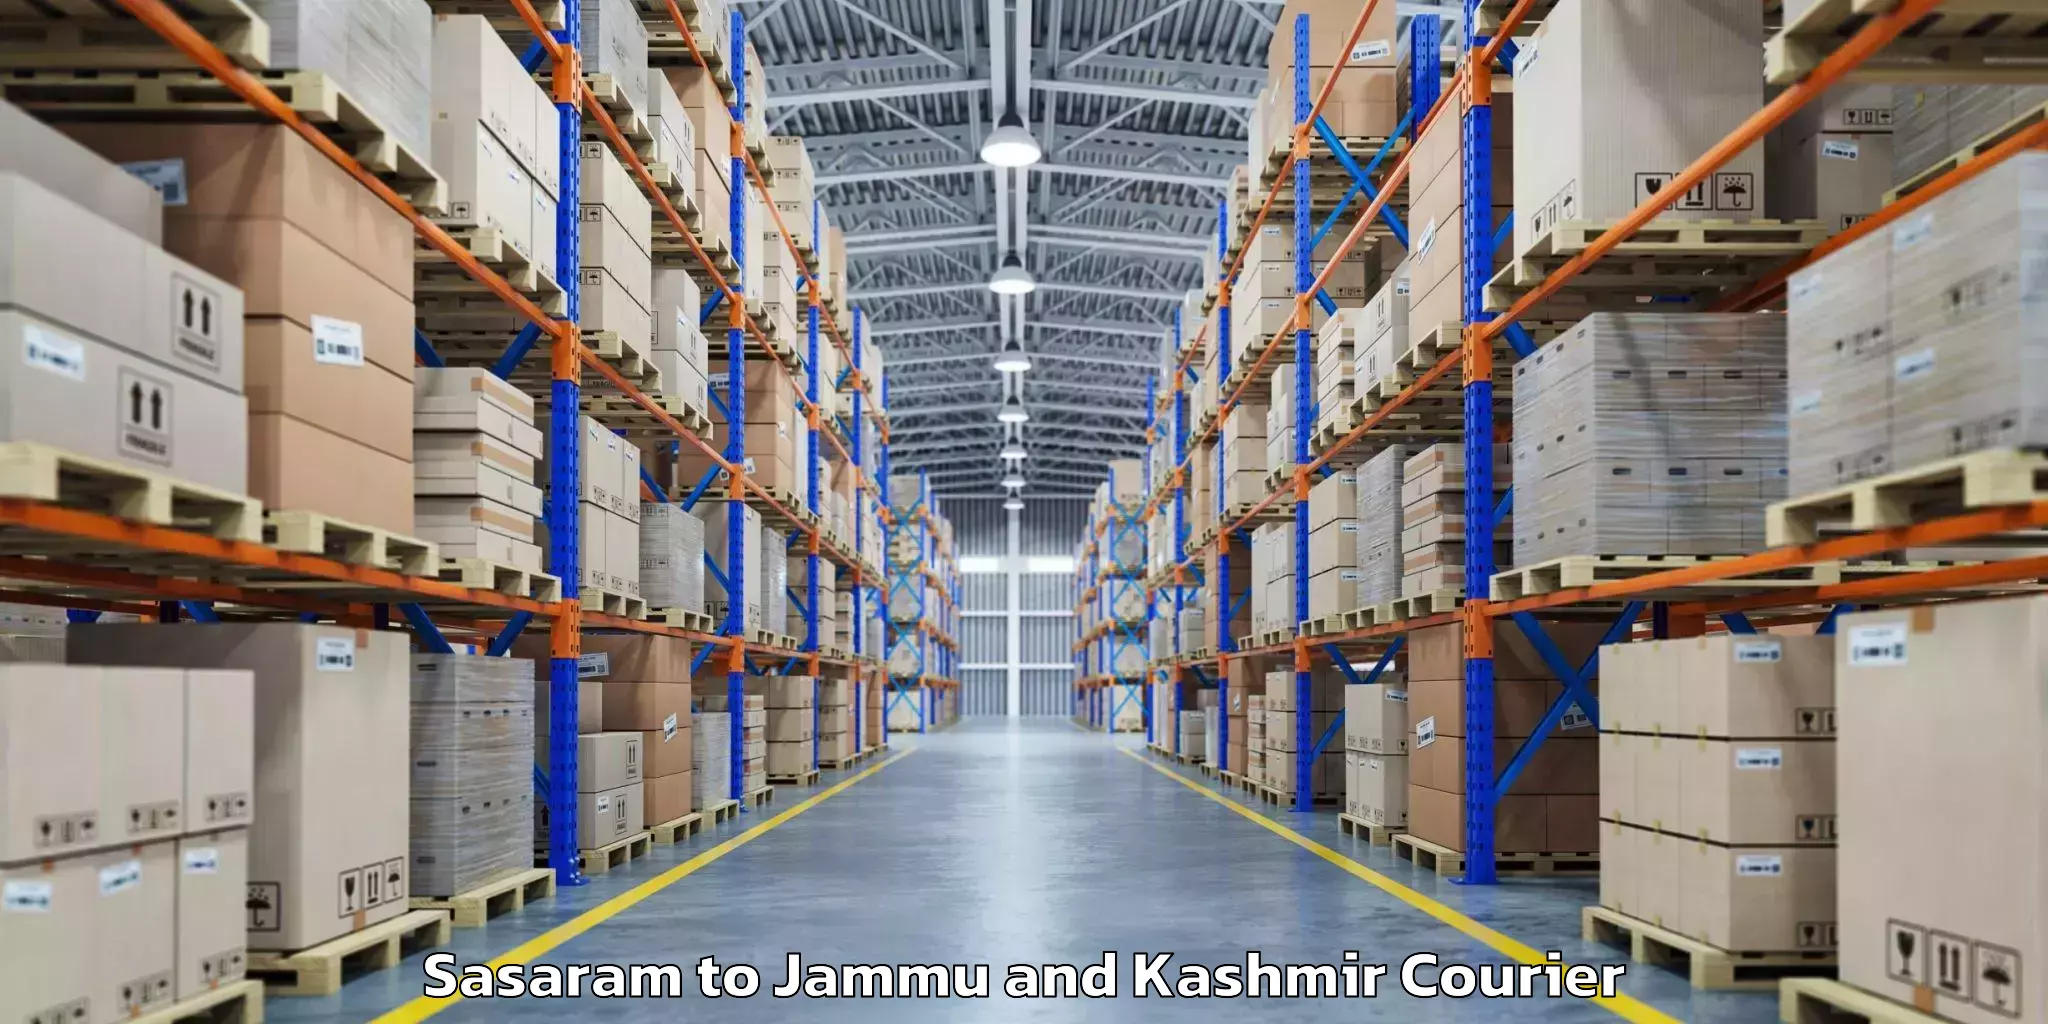 Luggage shipping specialists Sasaram to Jammu and Kashmir